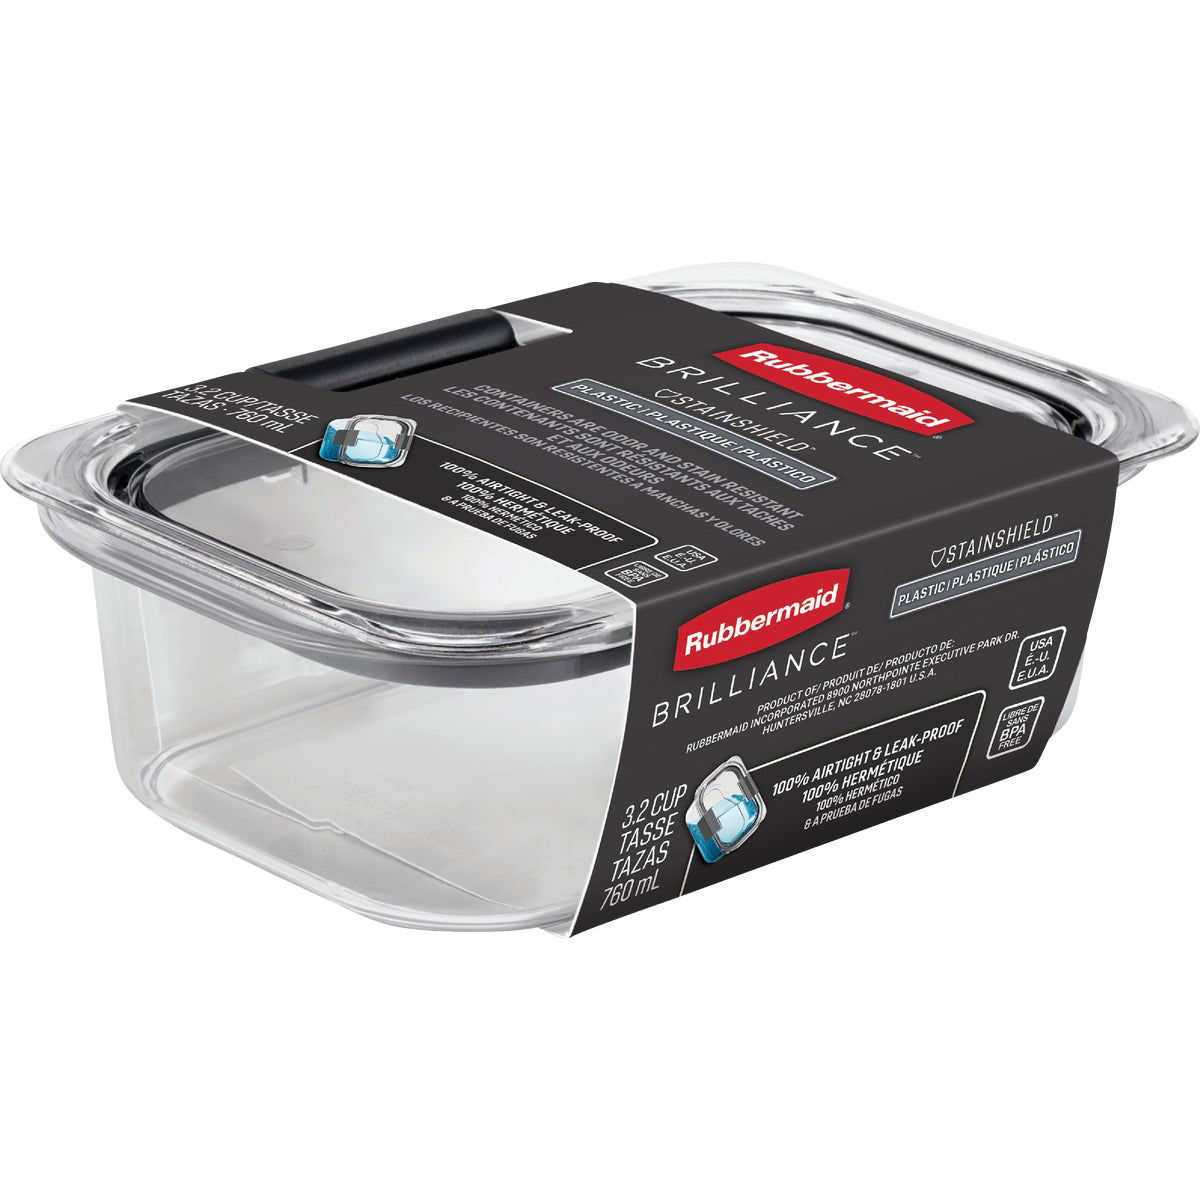 Save on Rubbermaid Brilliance Glass Oven Safe Food Container 3.2 Cup Order  Online Delivery